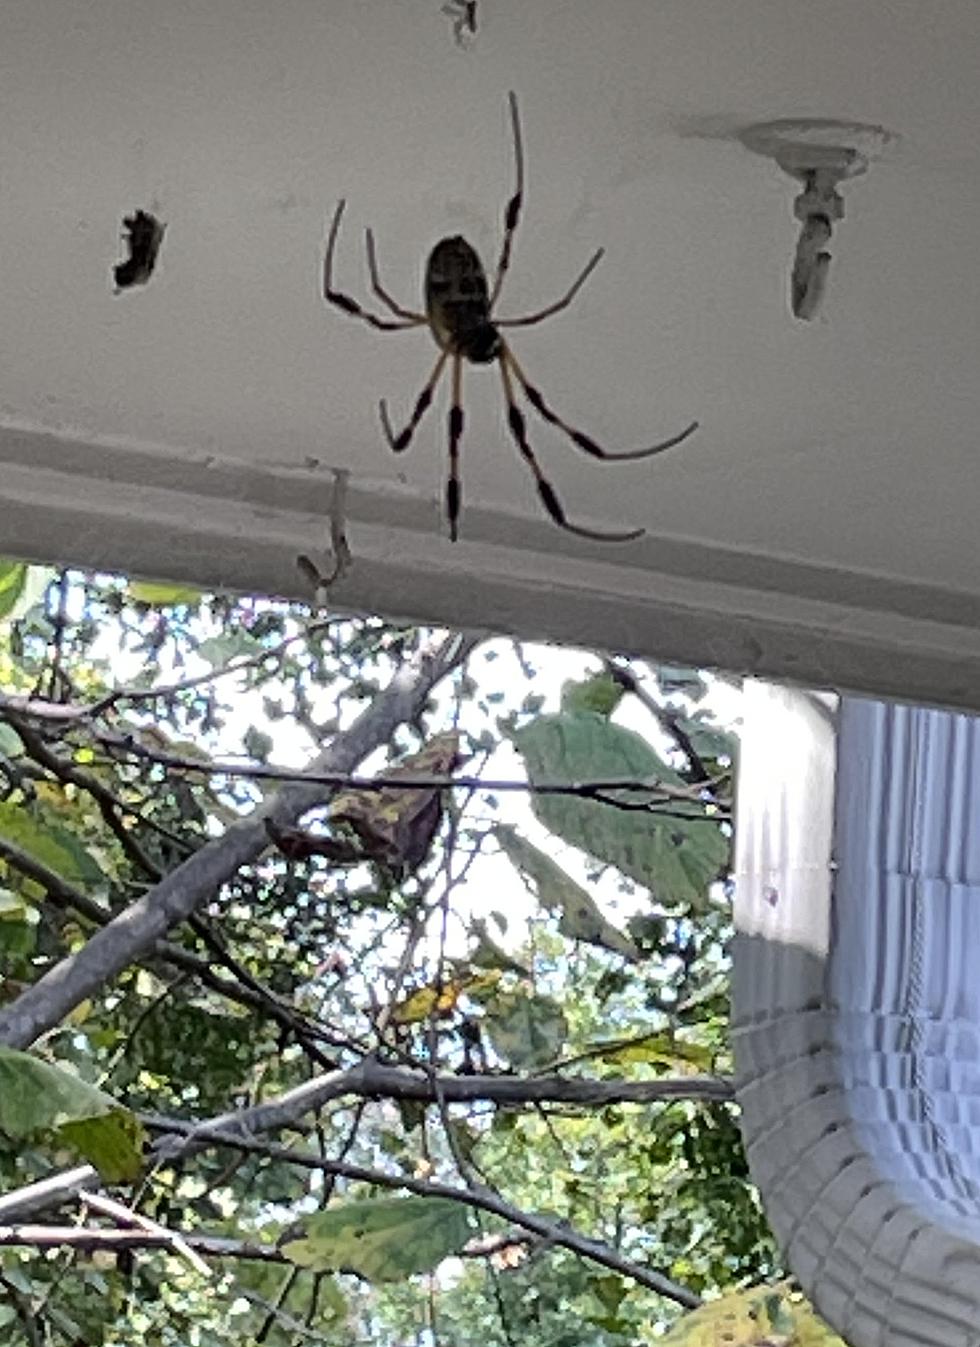 In Case You Missed It: Giant Spiders In Tuscaloosa, Alabama